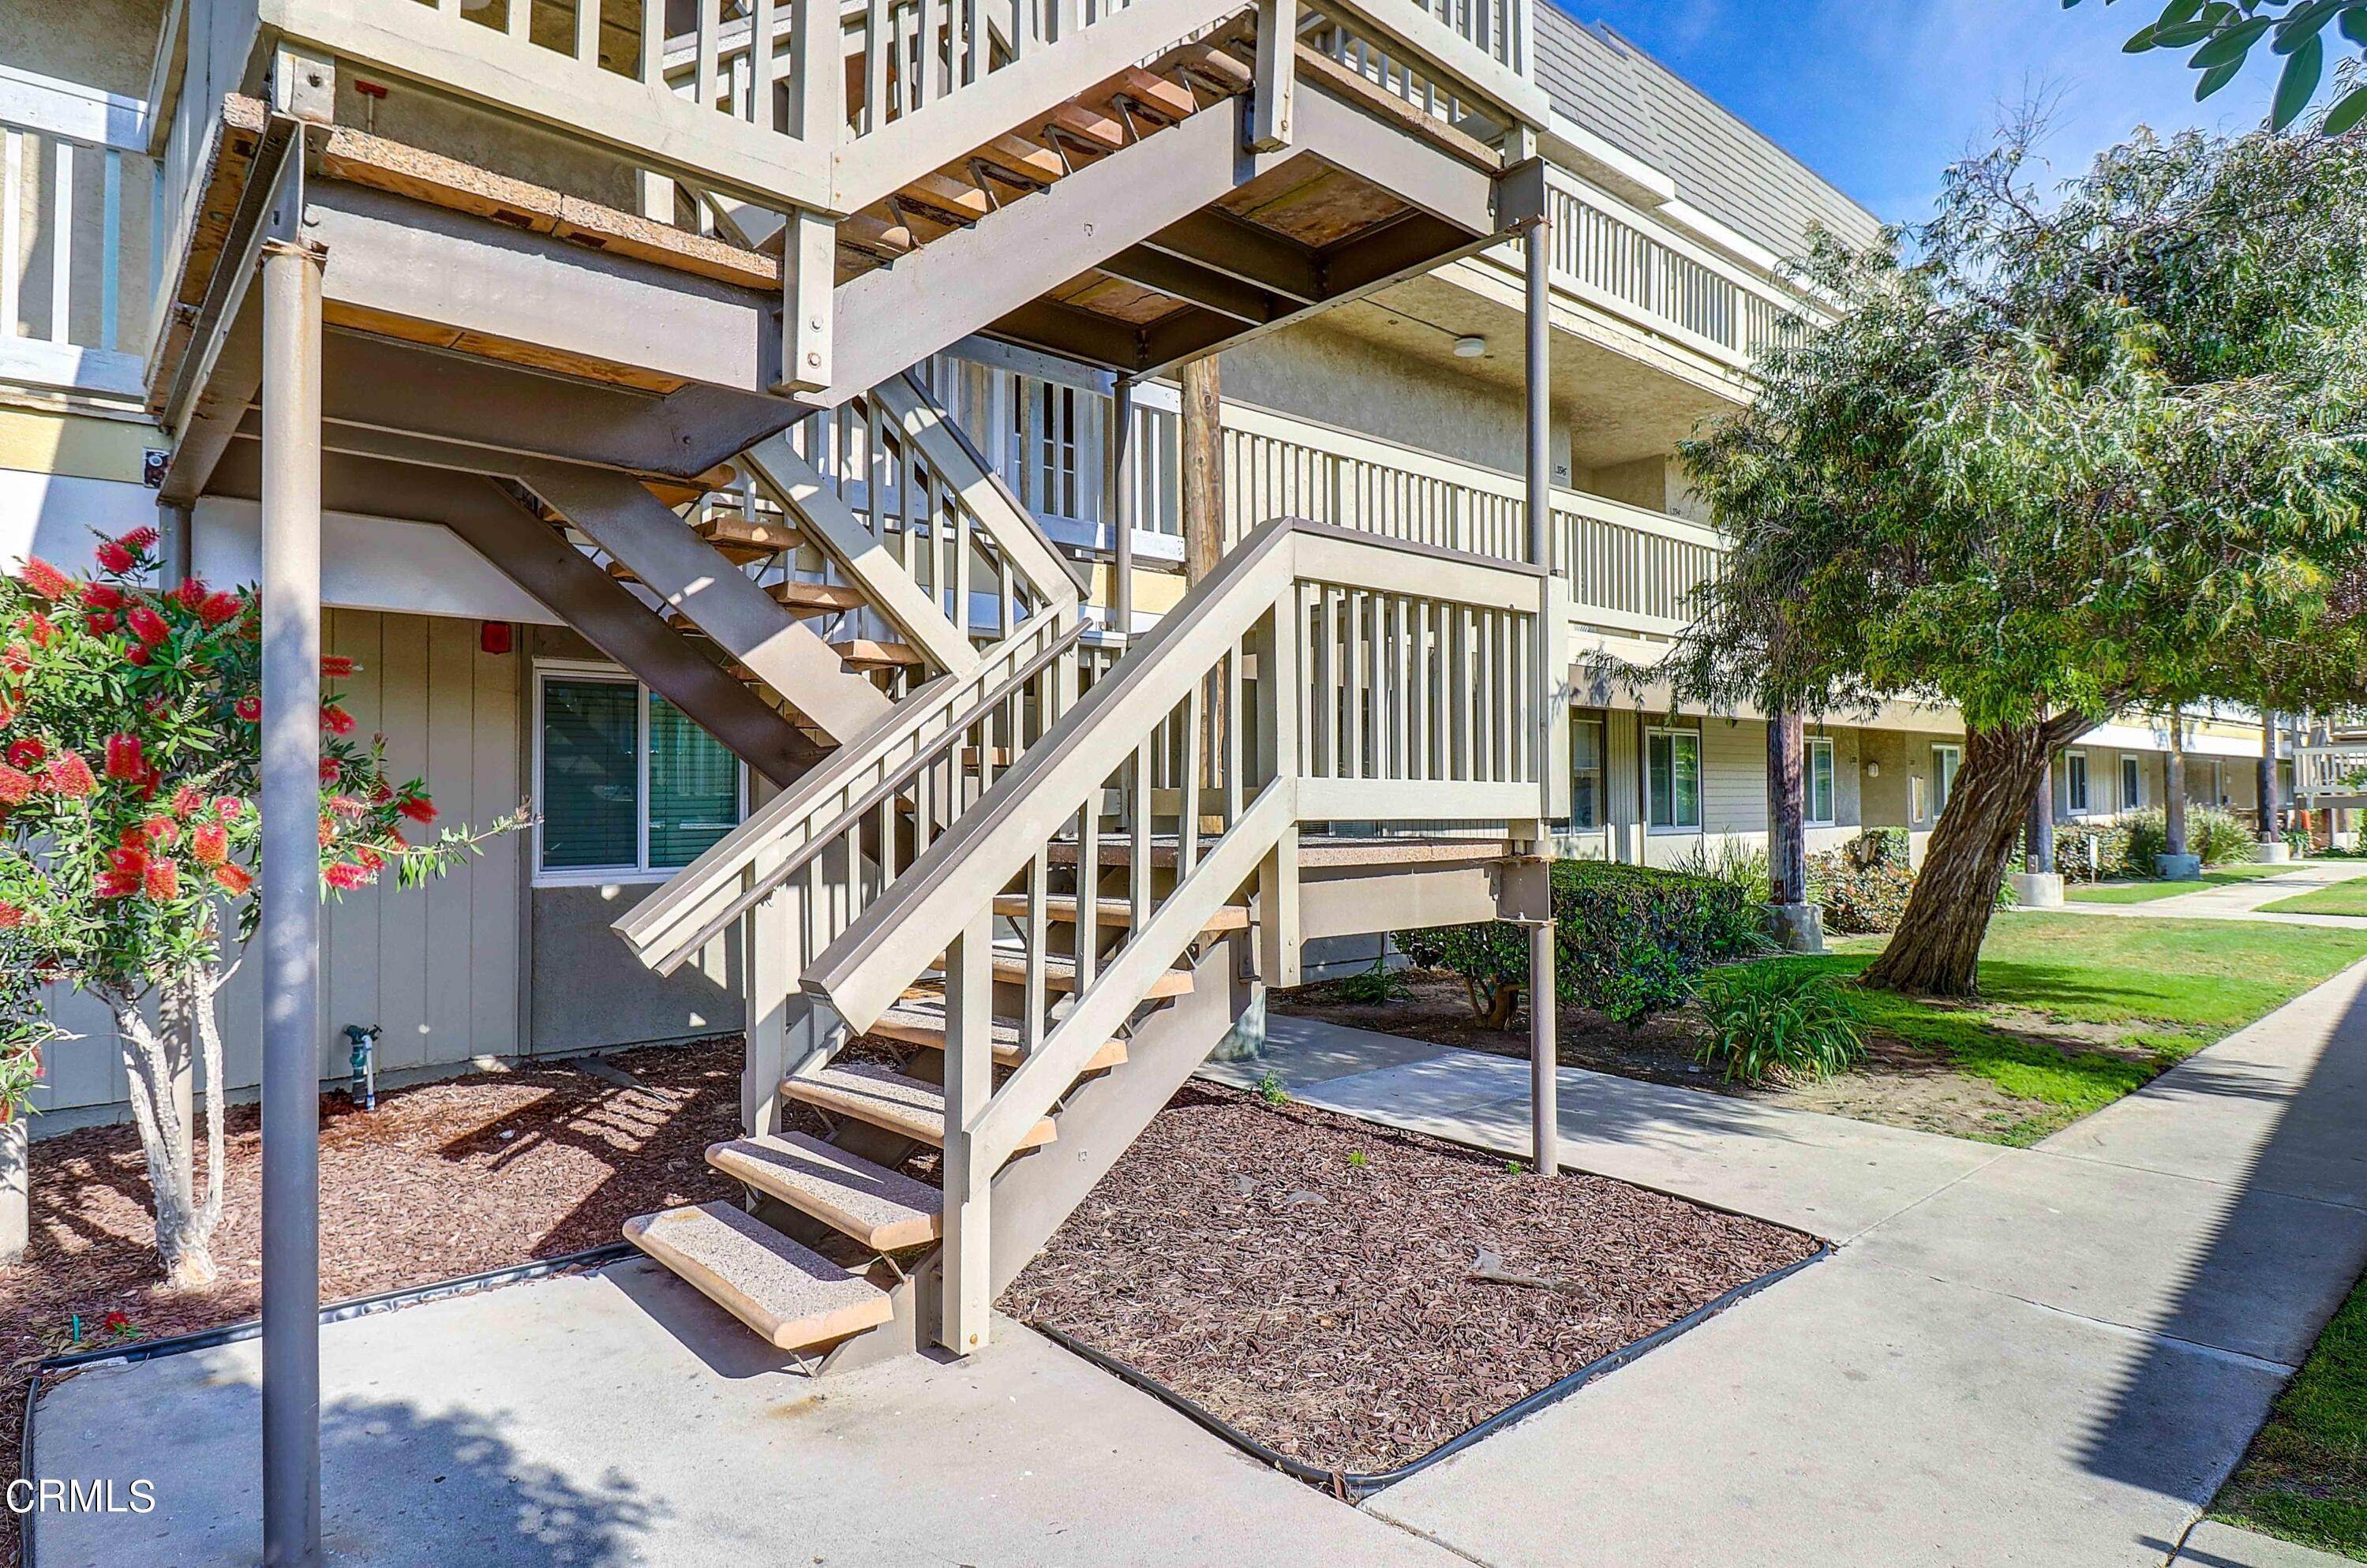 4. Condominiums for Sale at 391 East Surfside Drive Port Hueneme, California 93041 United States